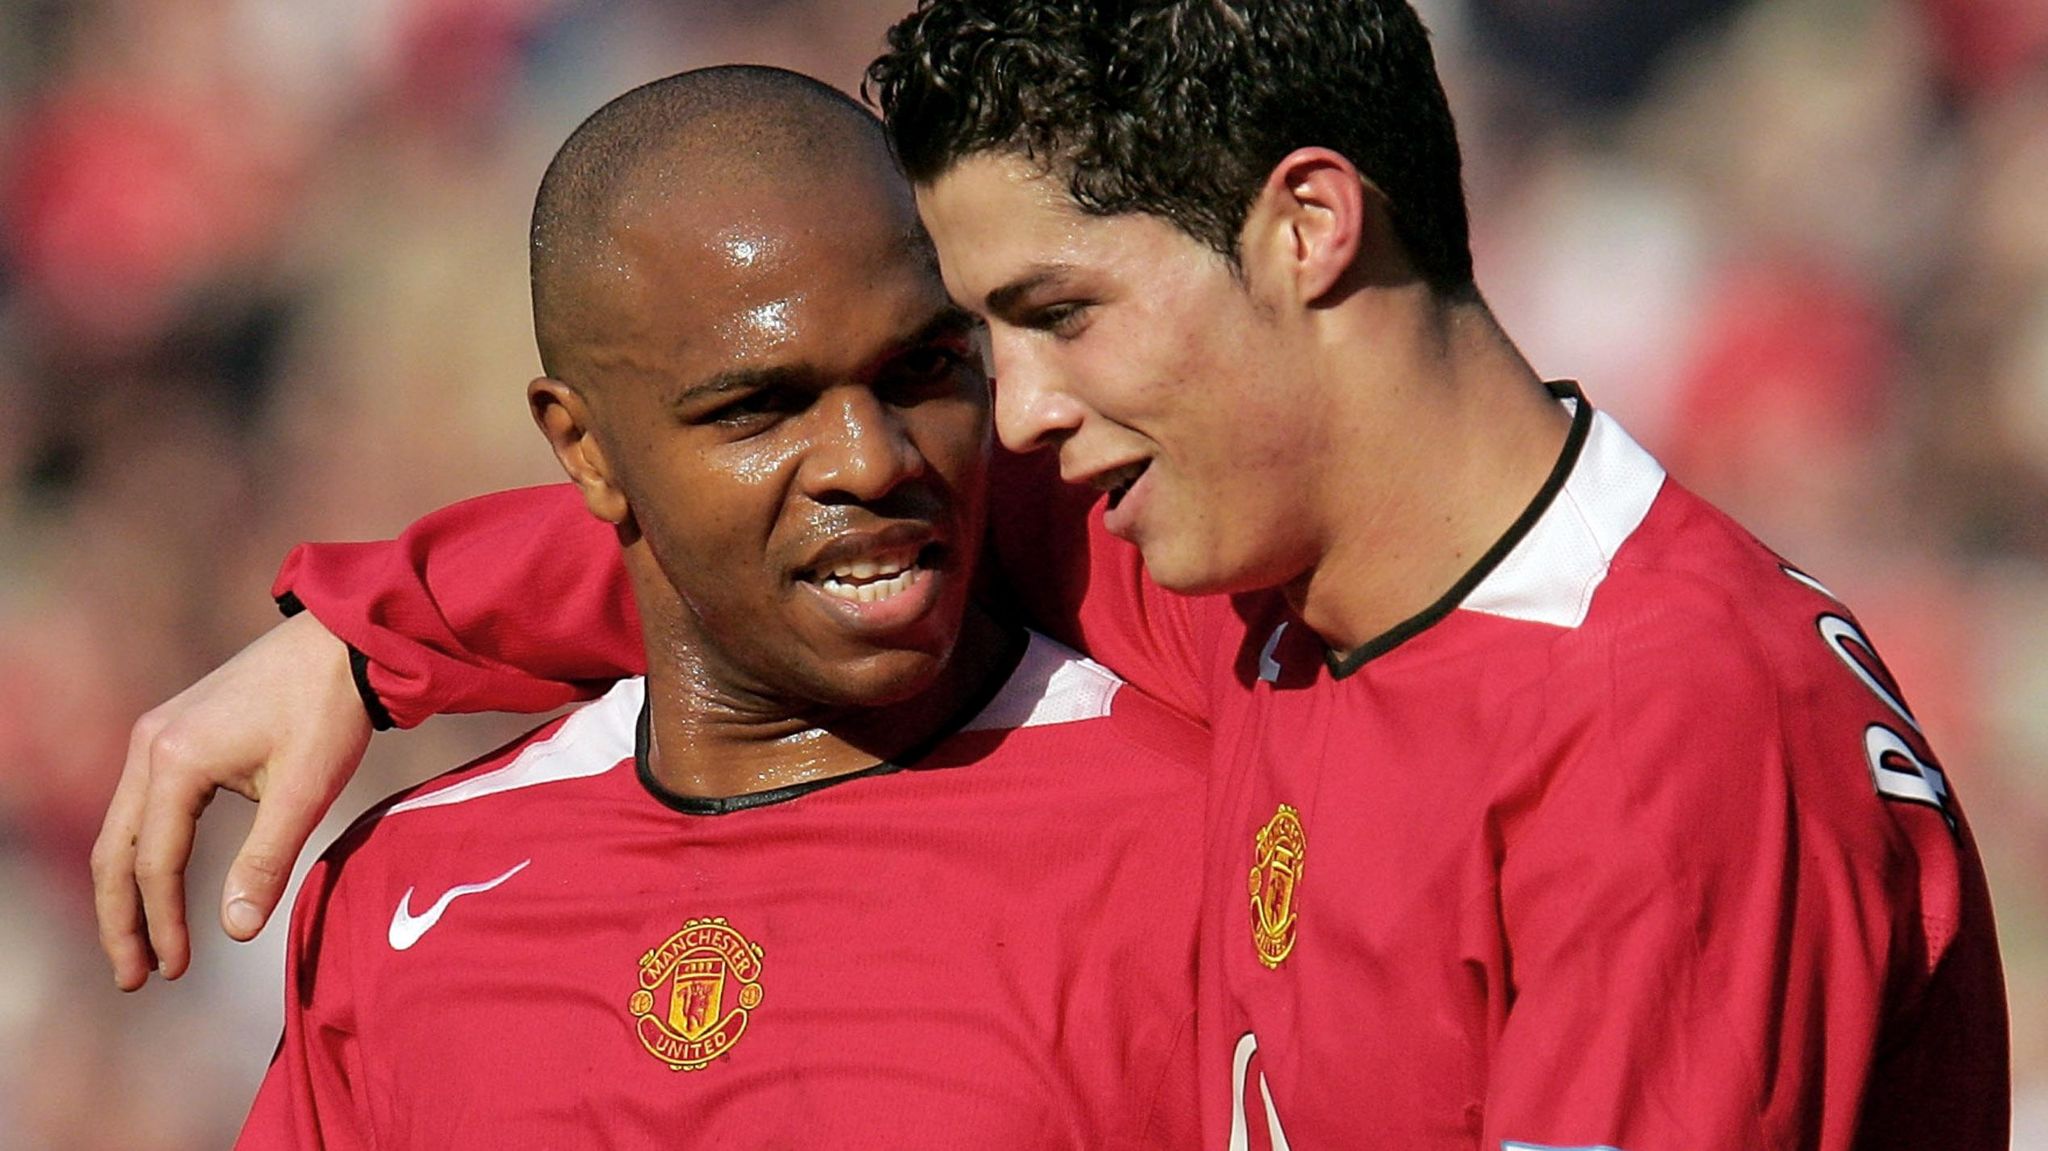 Cristiano Ronaldo's Unyielding Determination: Insights from Quinton Fortune